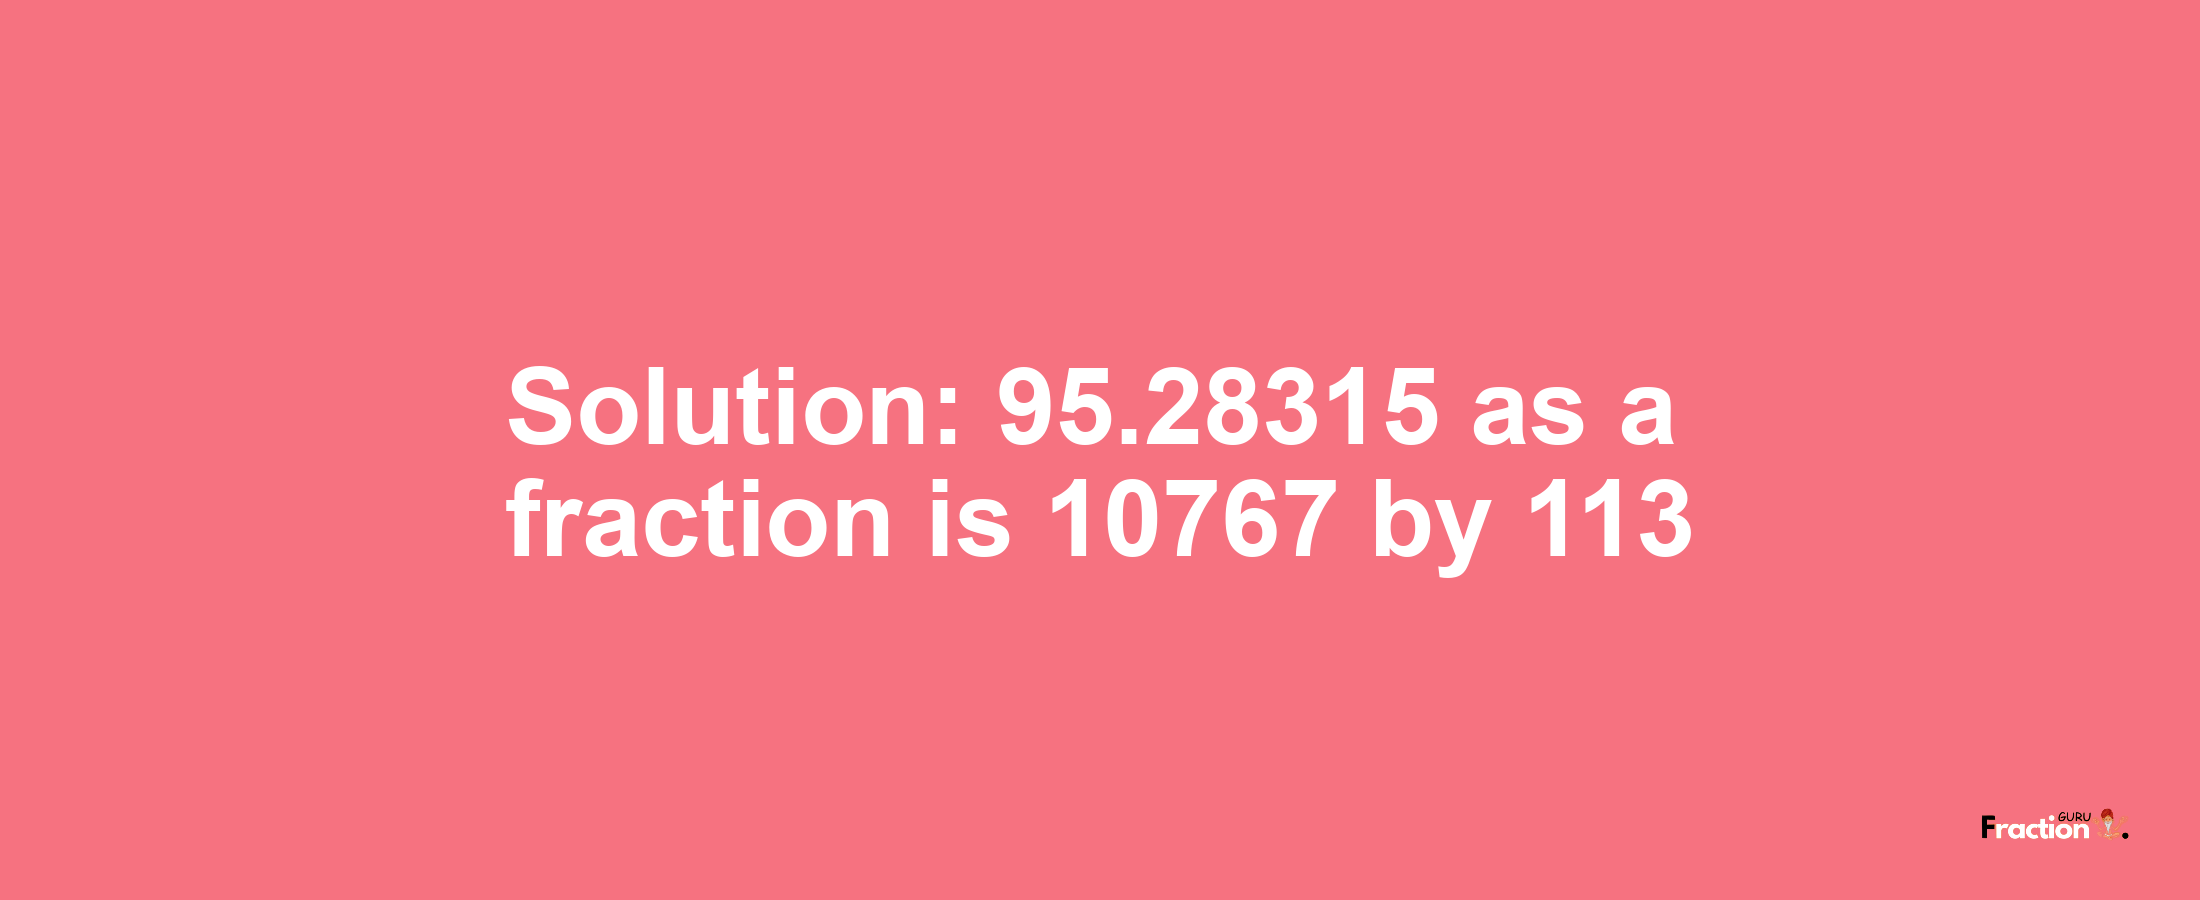 Solution:95.28315 as a fraction is 10767/113